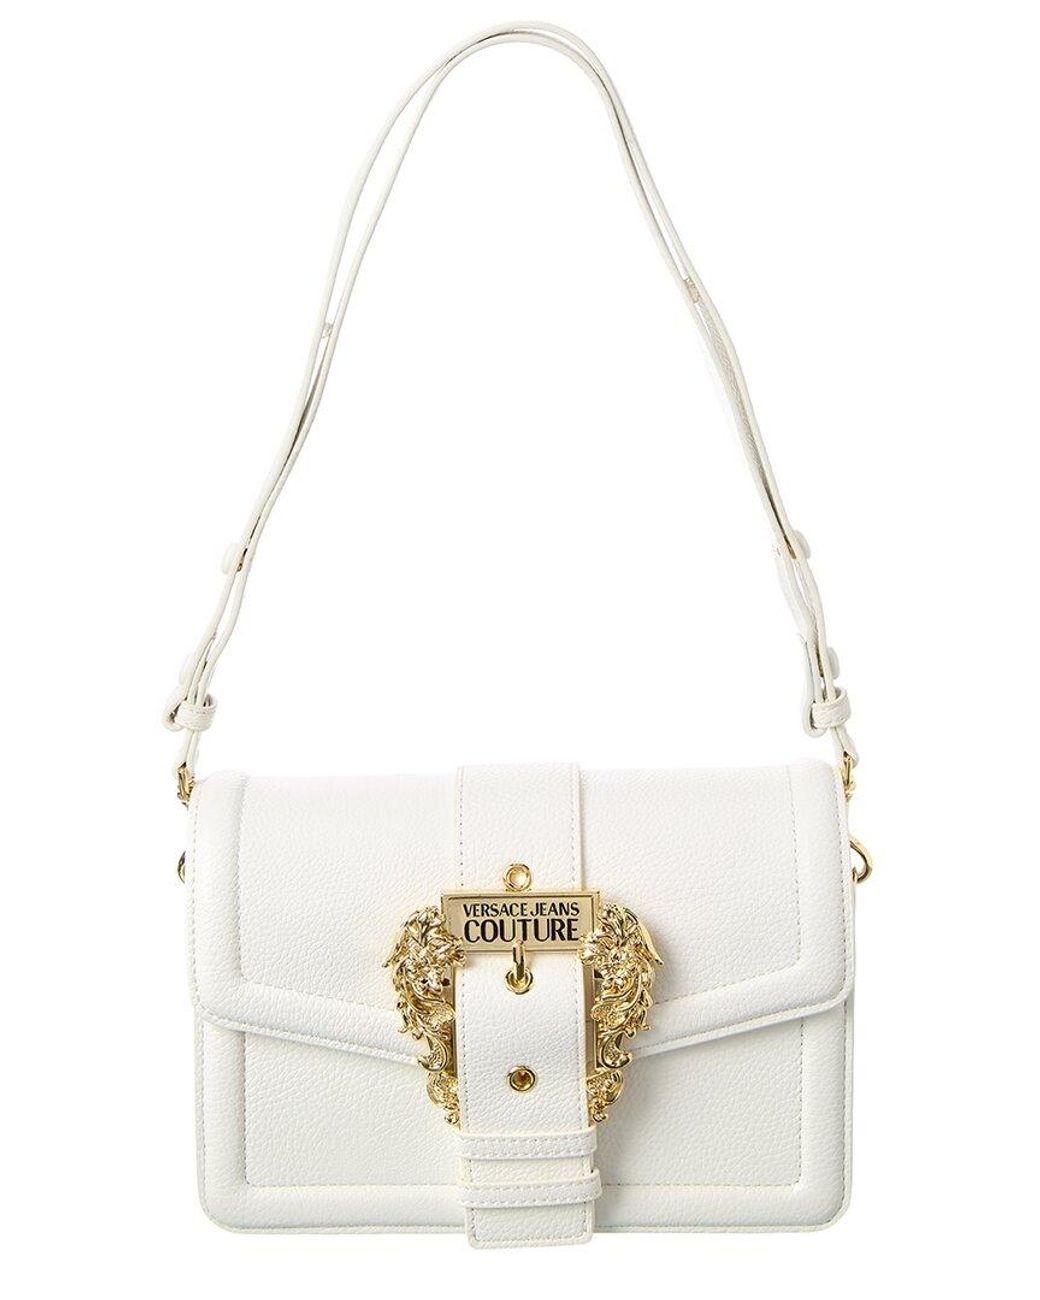 Versace Jeans Couture Couture Shoulder Bag in White | Lyst